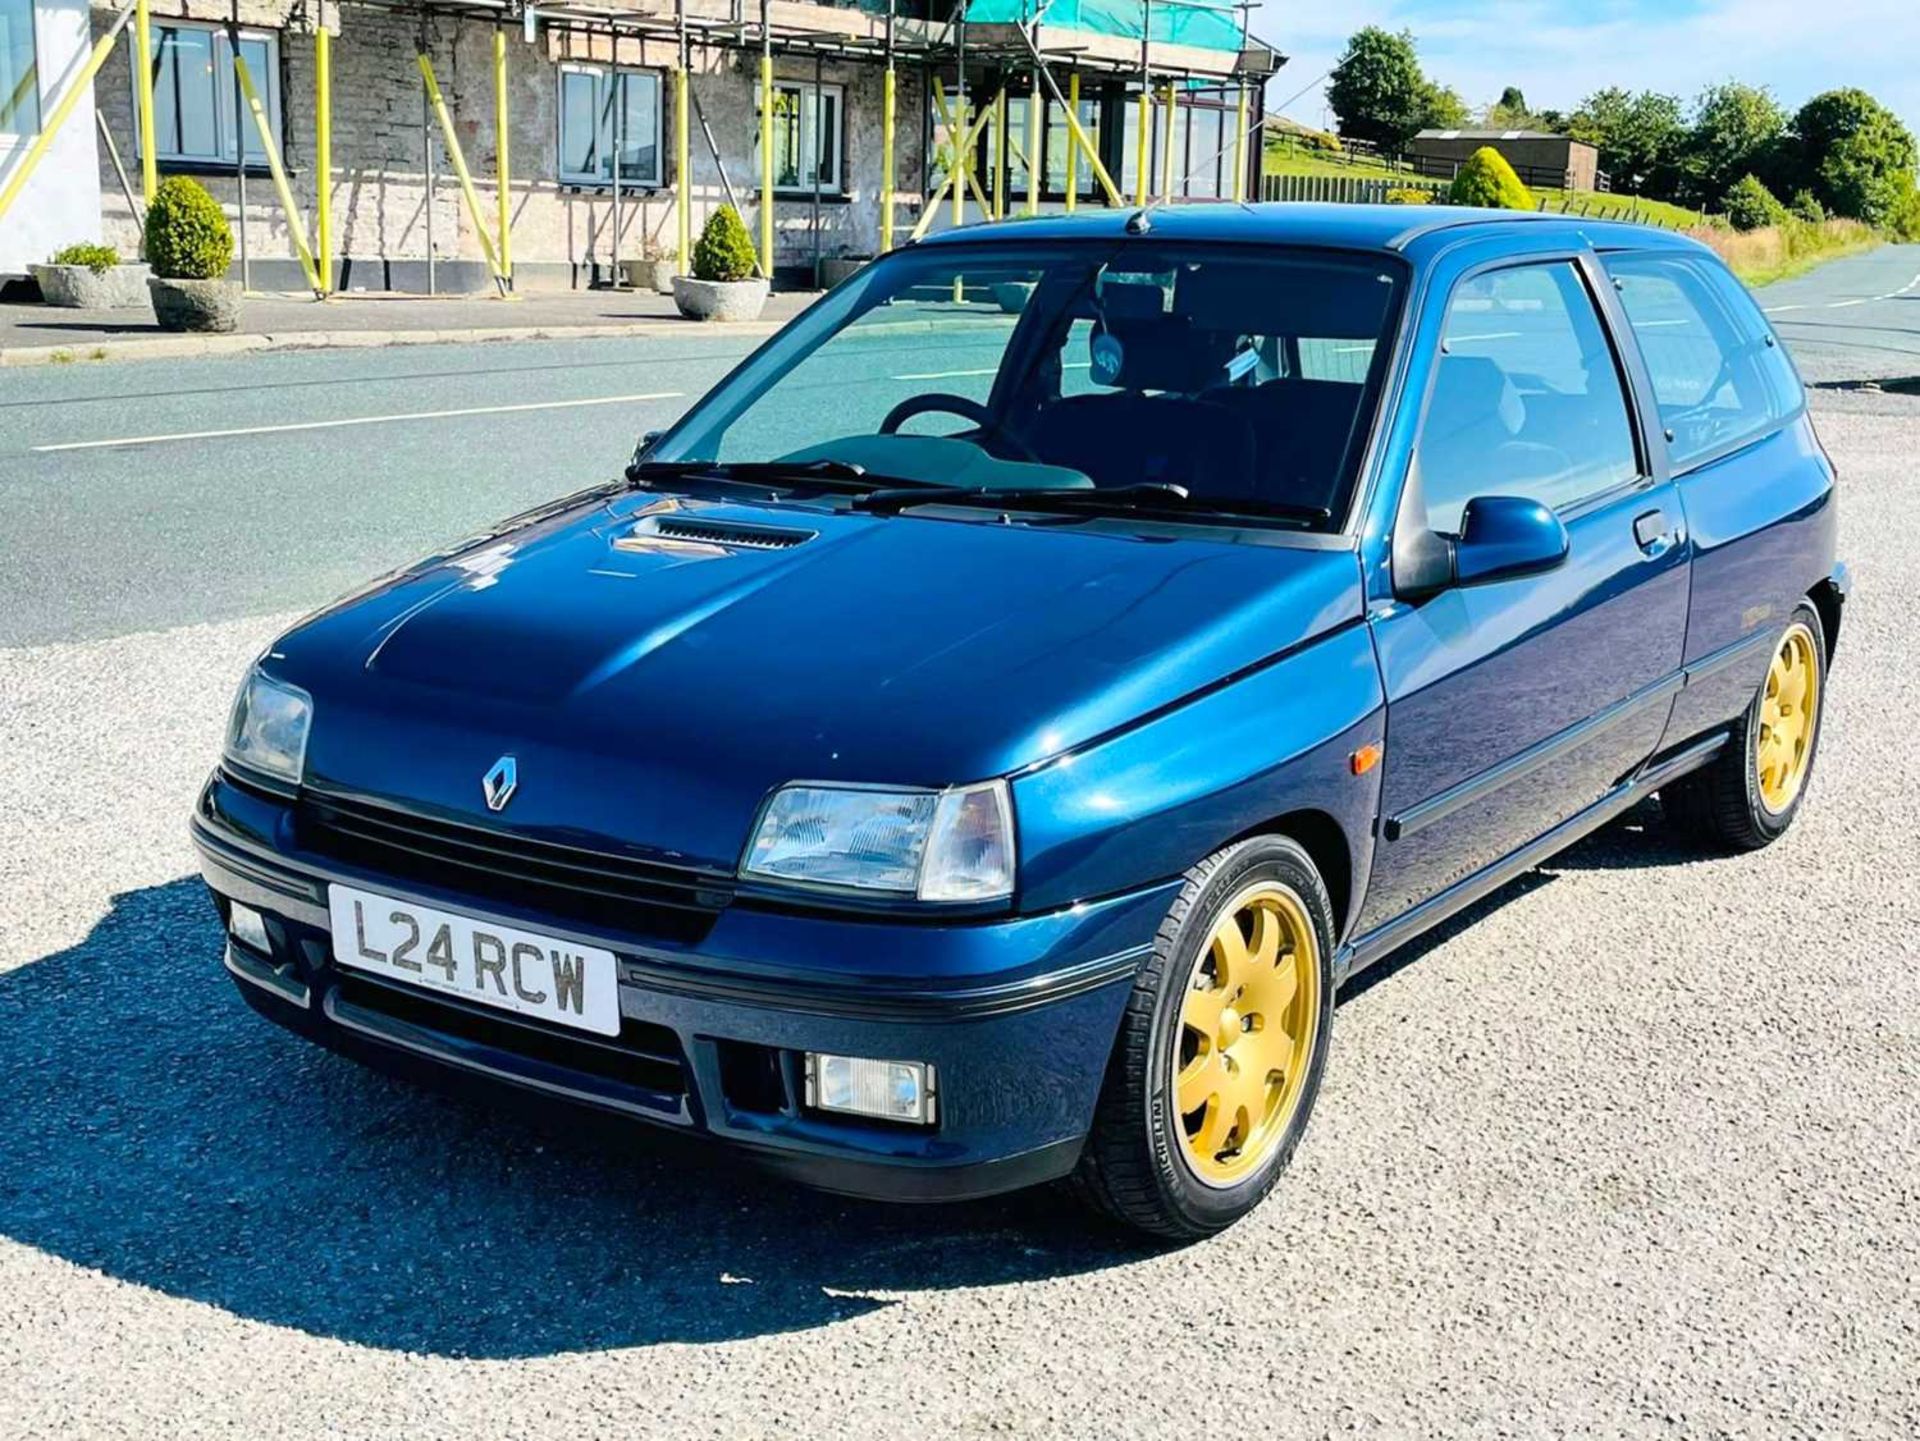 1994 Renault Clio Williams UK-delivered, first series model and said to be one of just 390 produced - Image 8 of 44